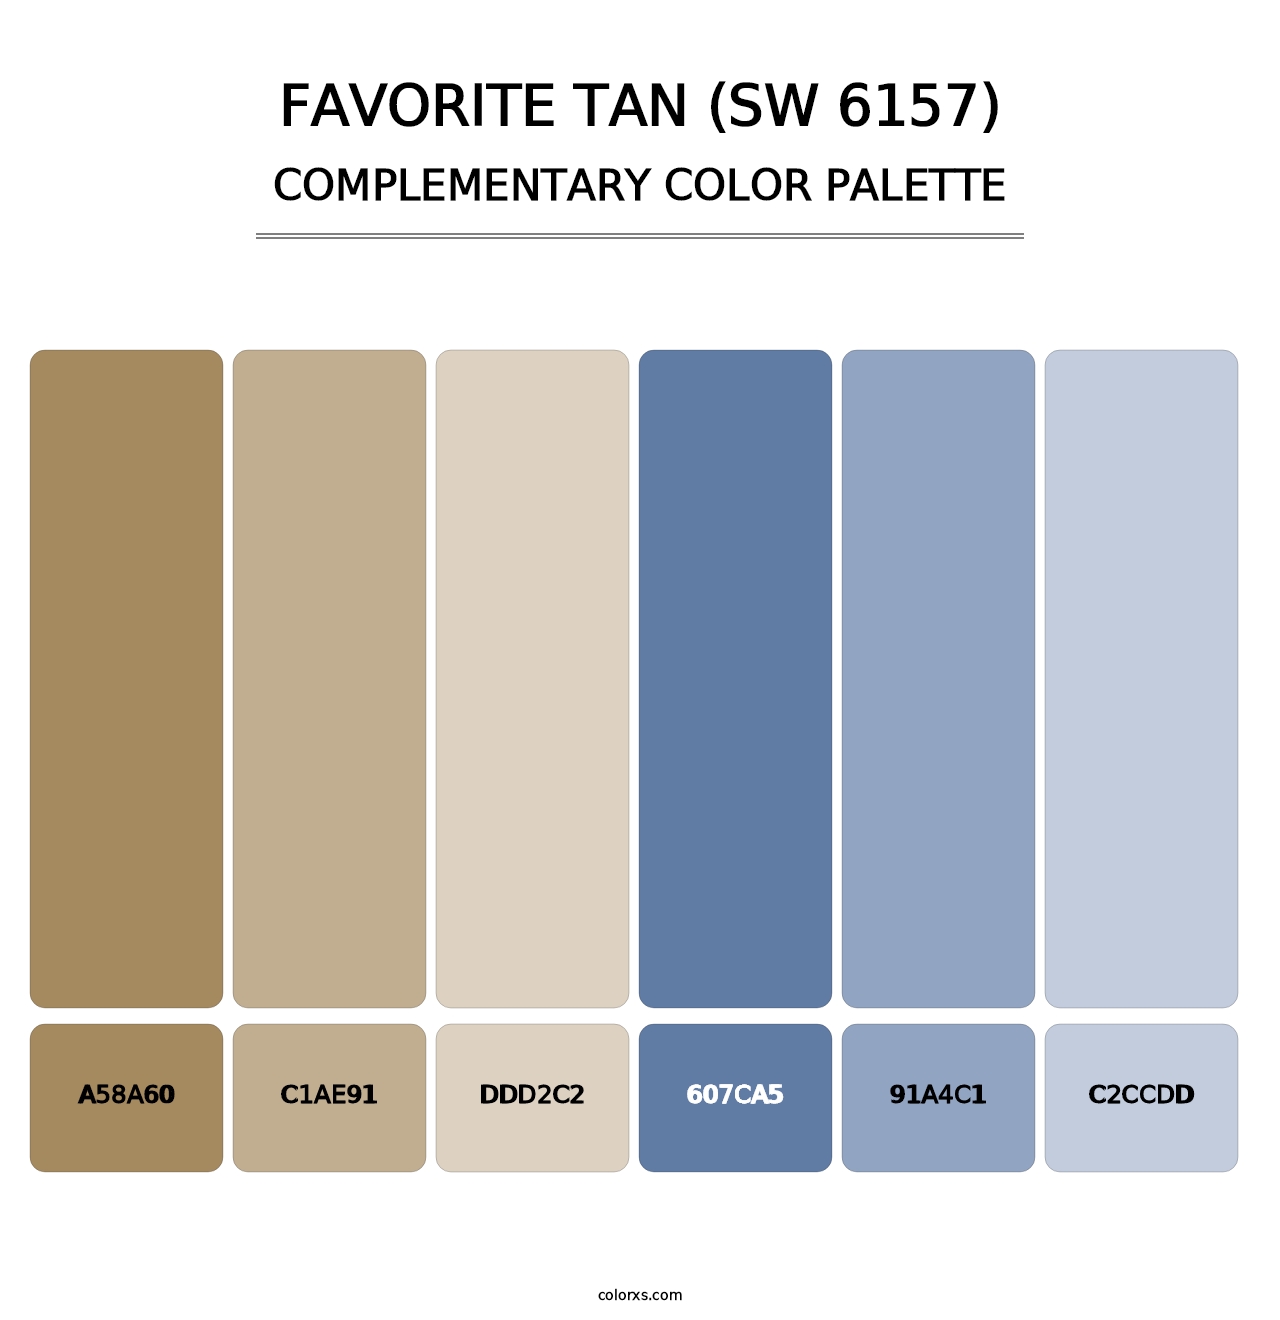 Favorite Tan (SW 6157) - Complementary Color Palette